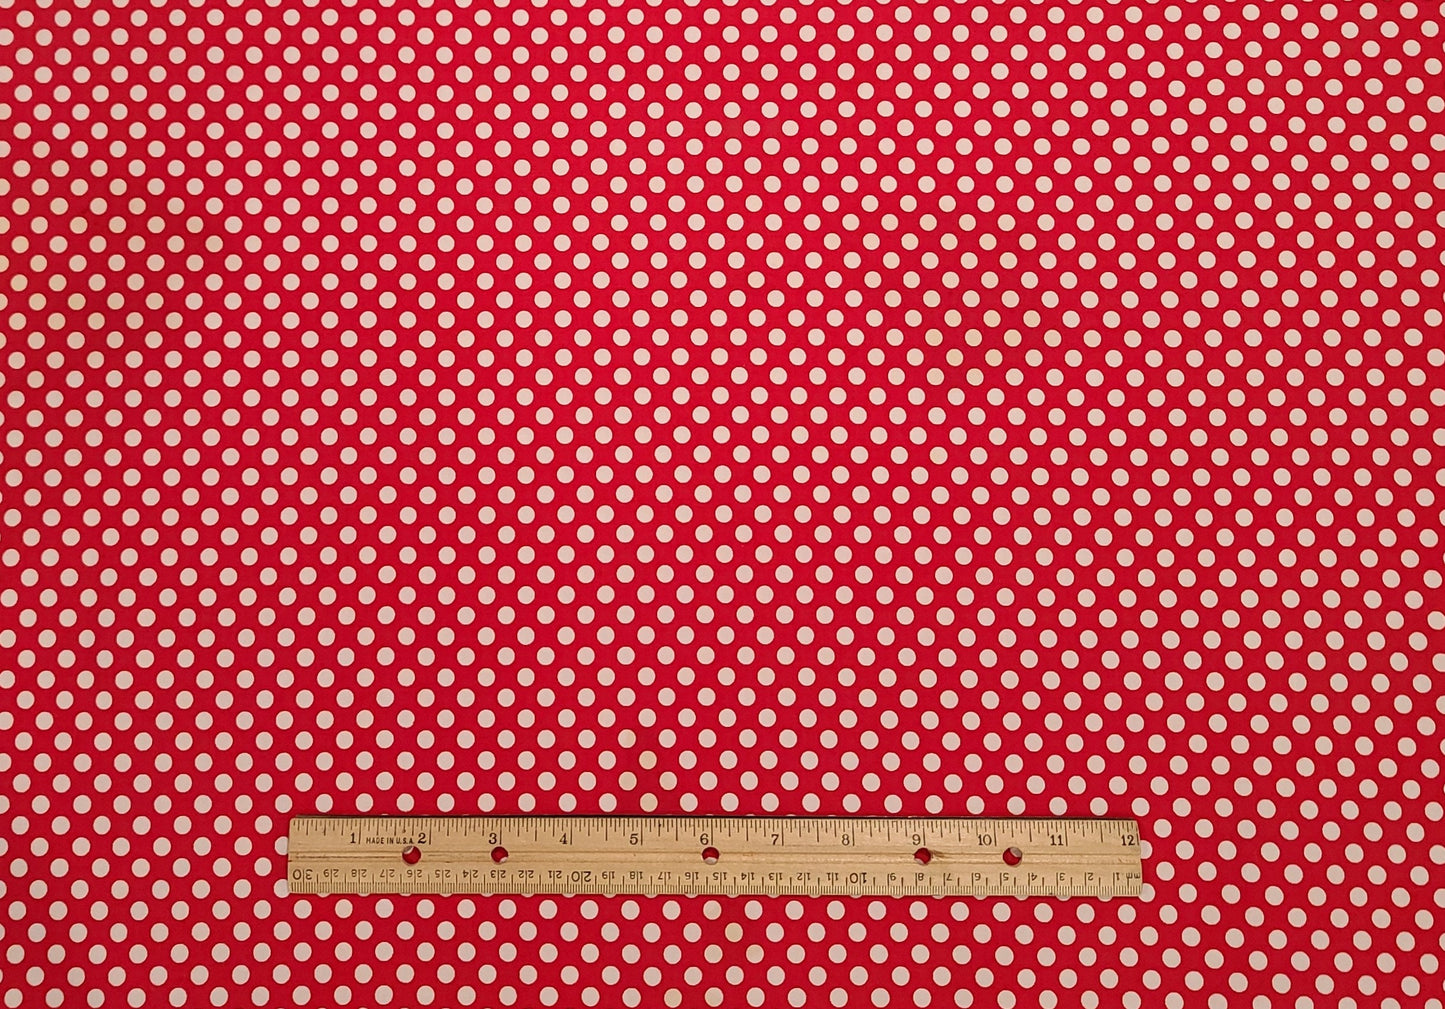 Riley Blake Designs Pattern C350 Dots by The RBD Designers 2012 - Bright Red Fabric / White Polka Dot